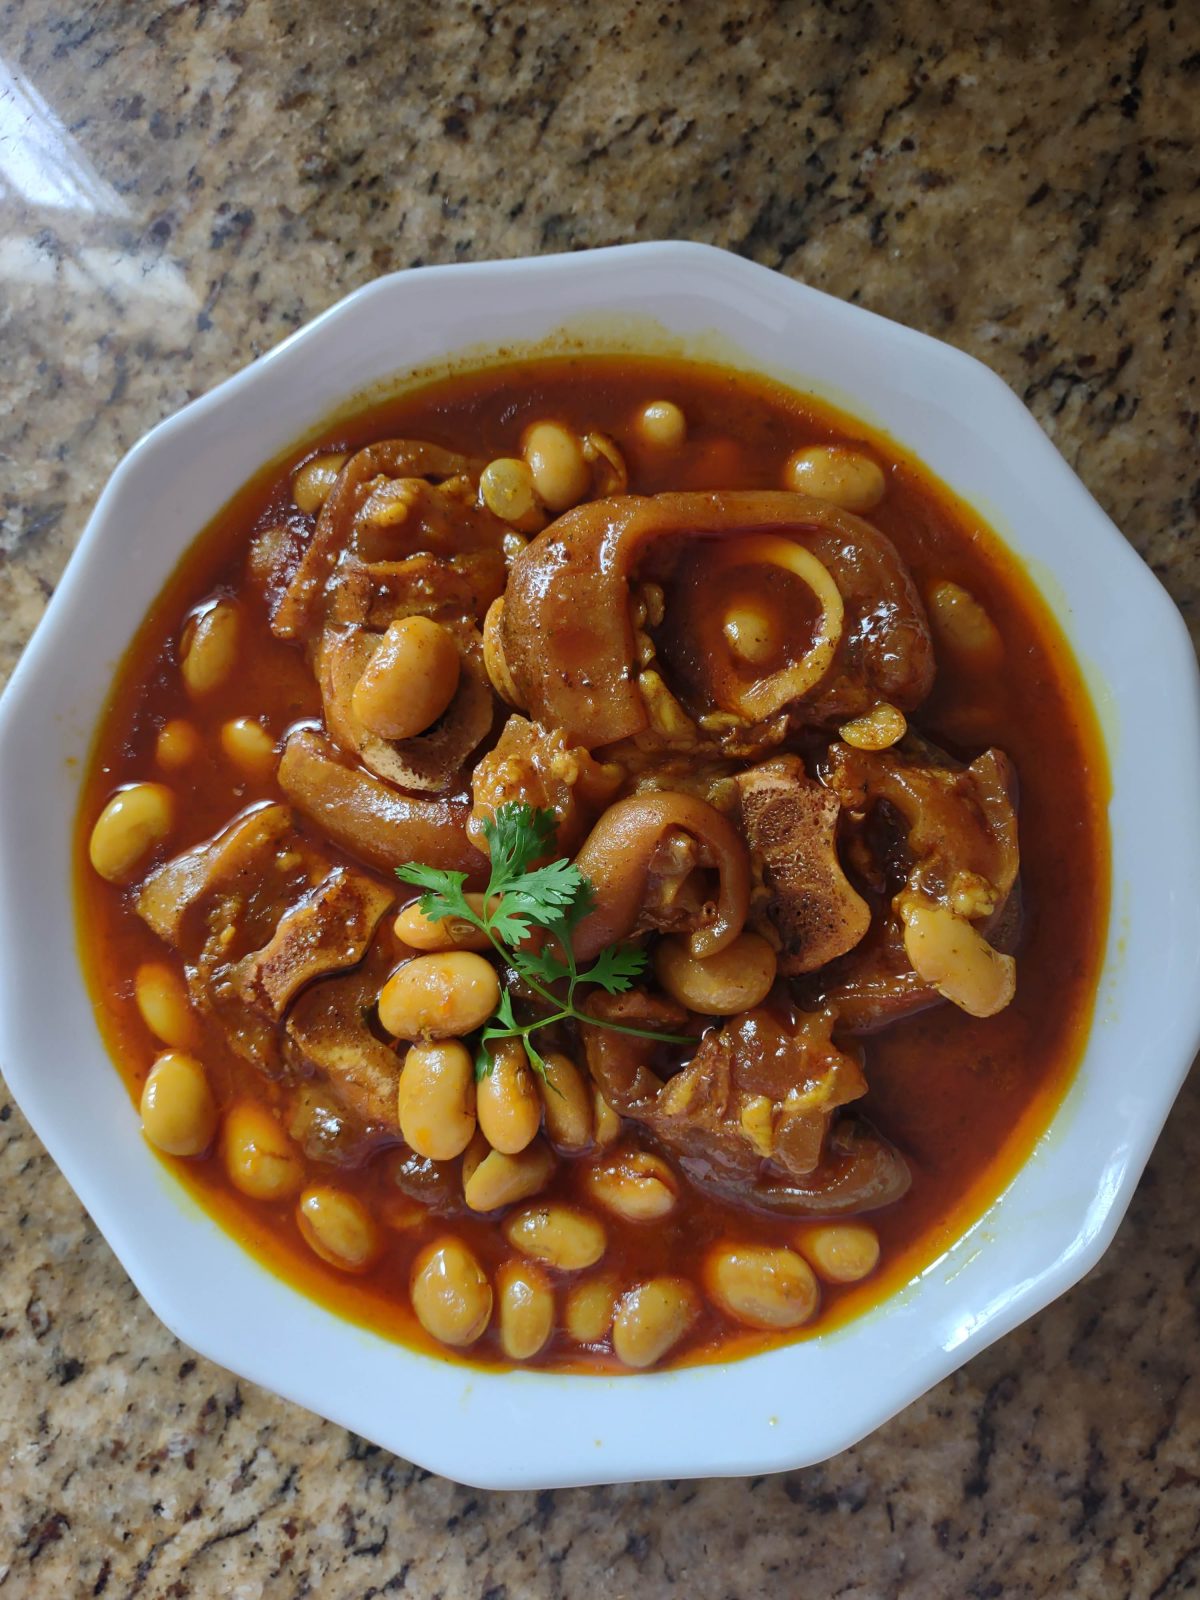  Jamaica Cow foot (cow heel) Curry with Butter beans (Photo by Cynthia Nelson)
